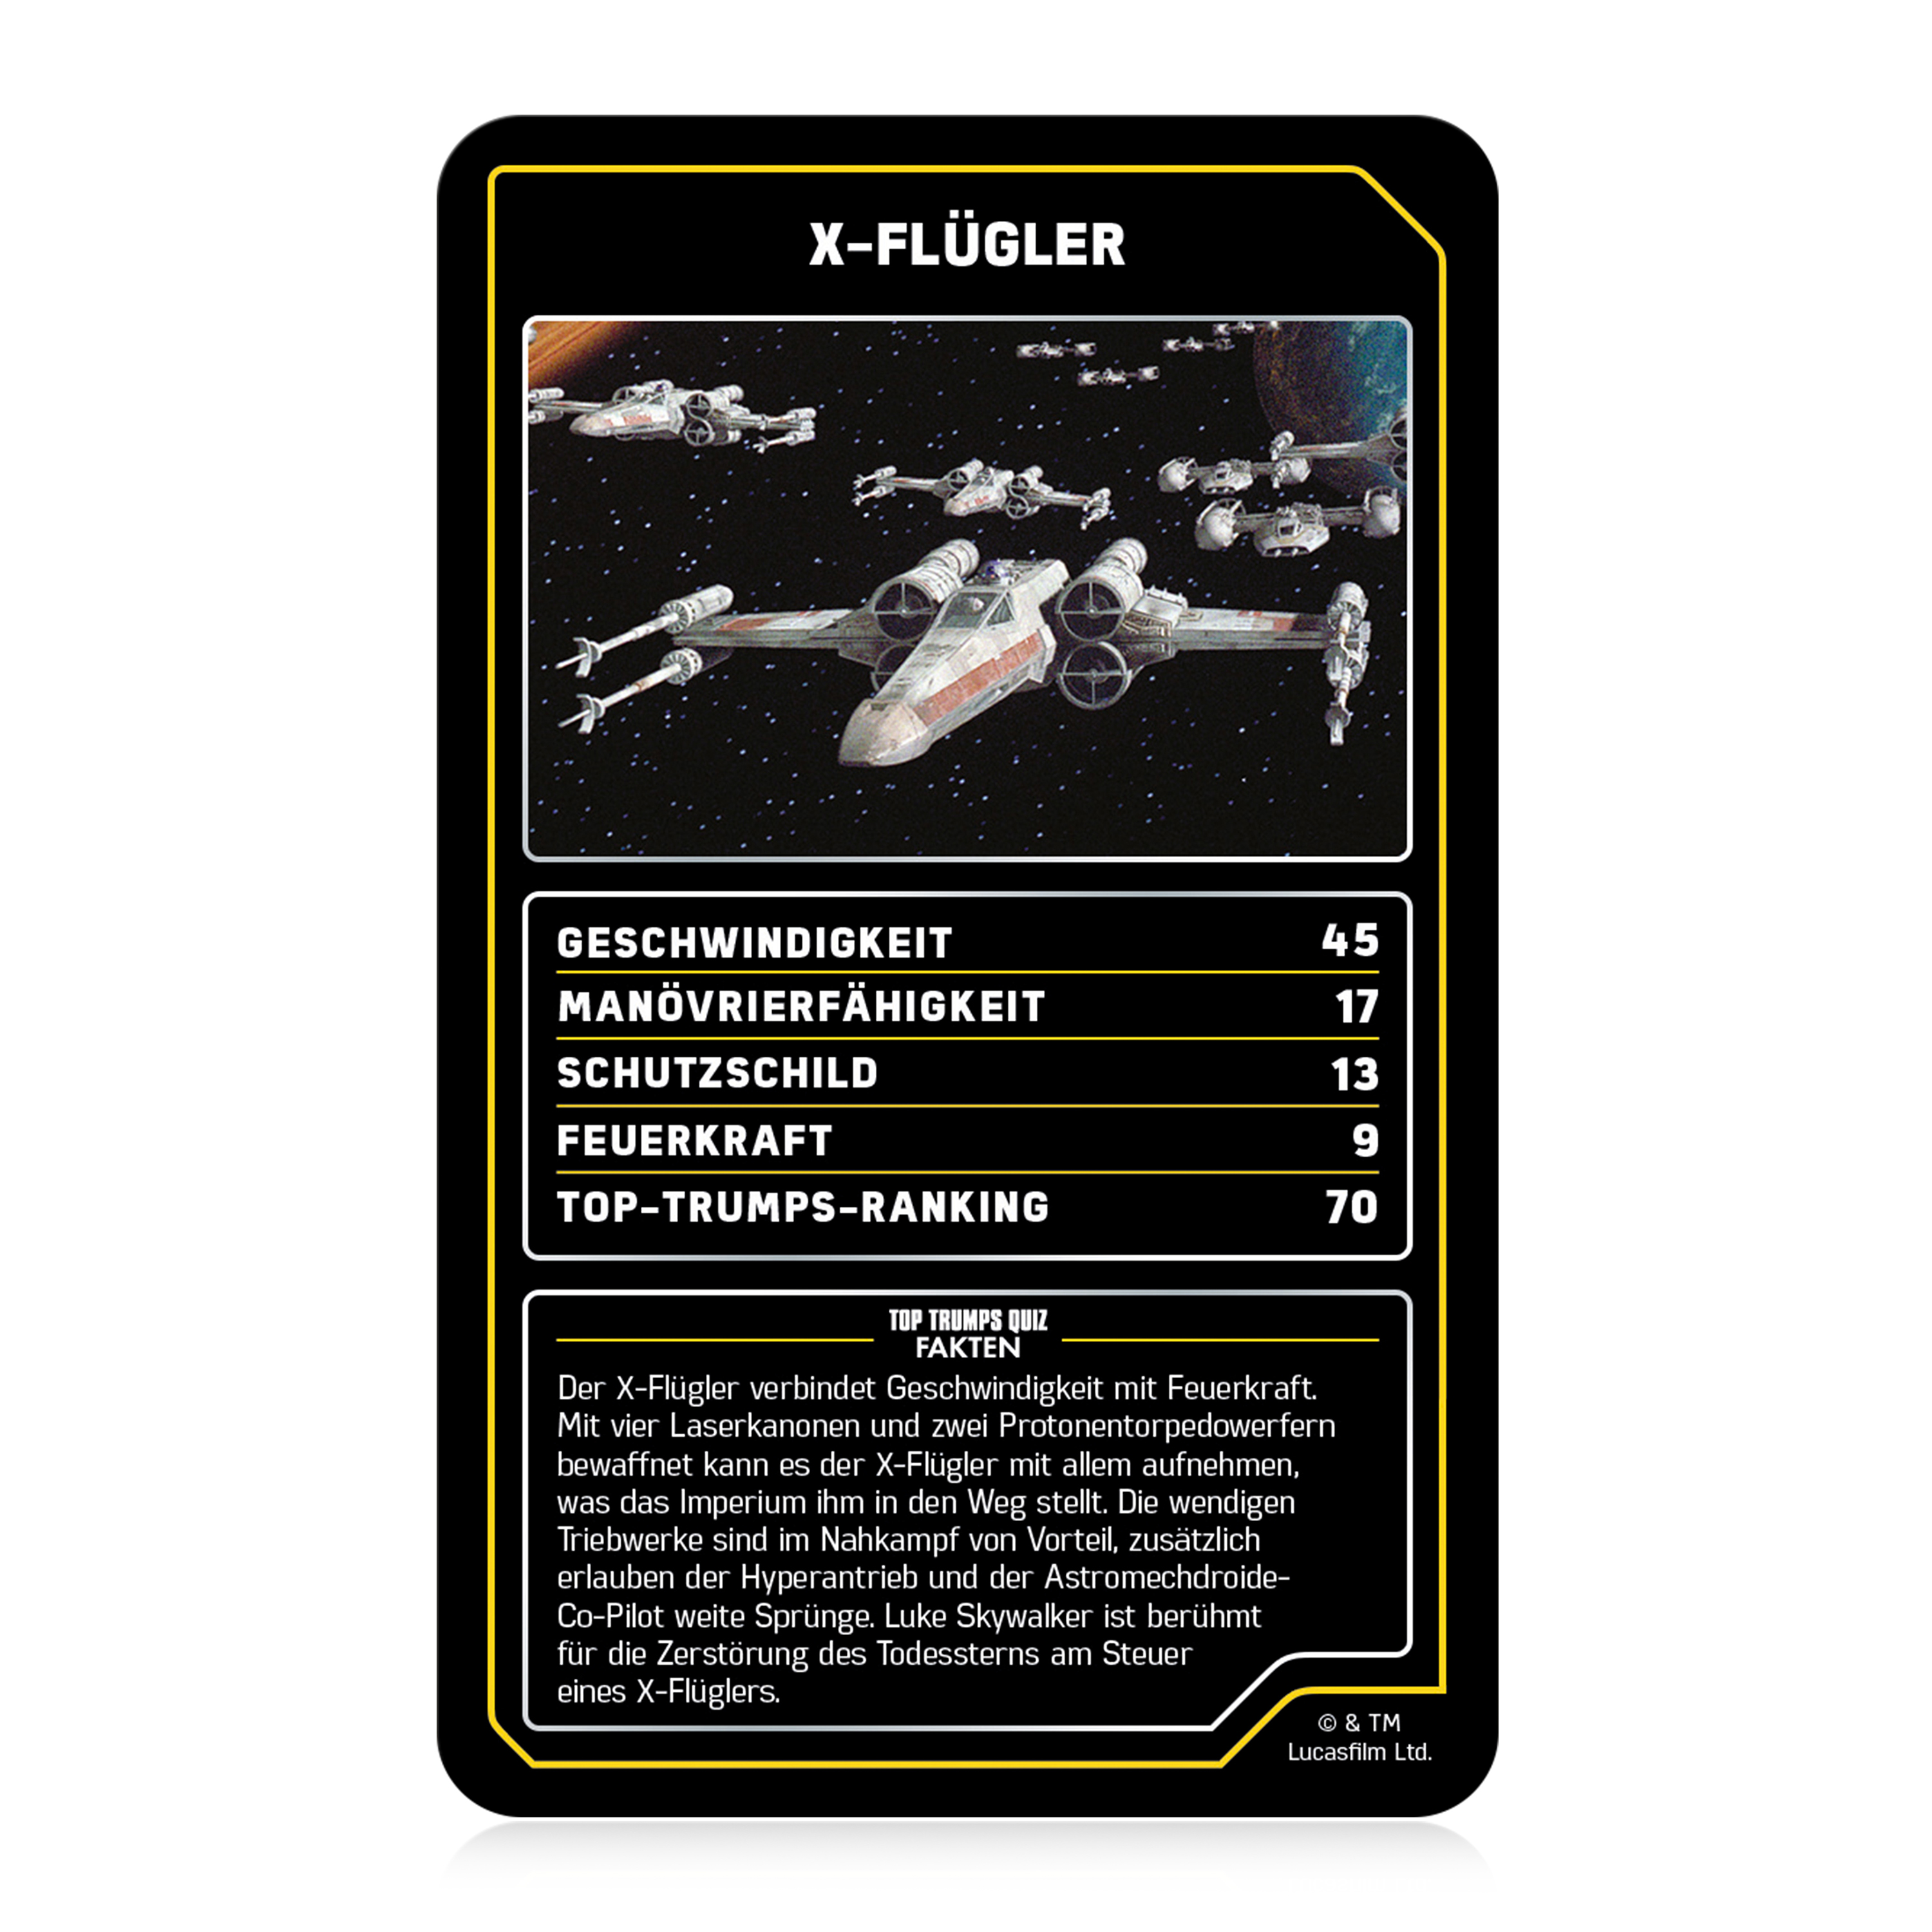 Top Trumps - Star Wars Raumschiffe Collectables